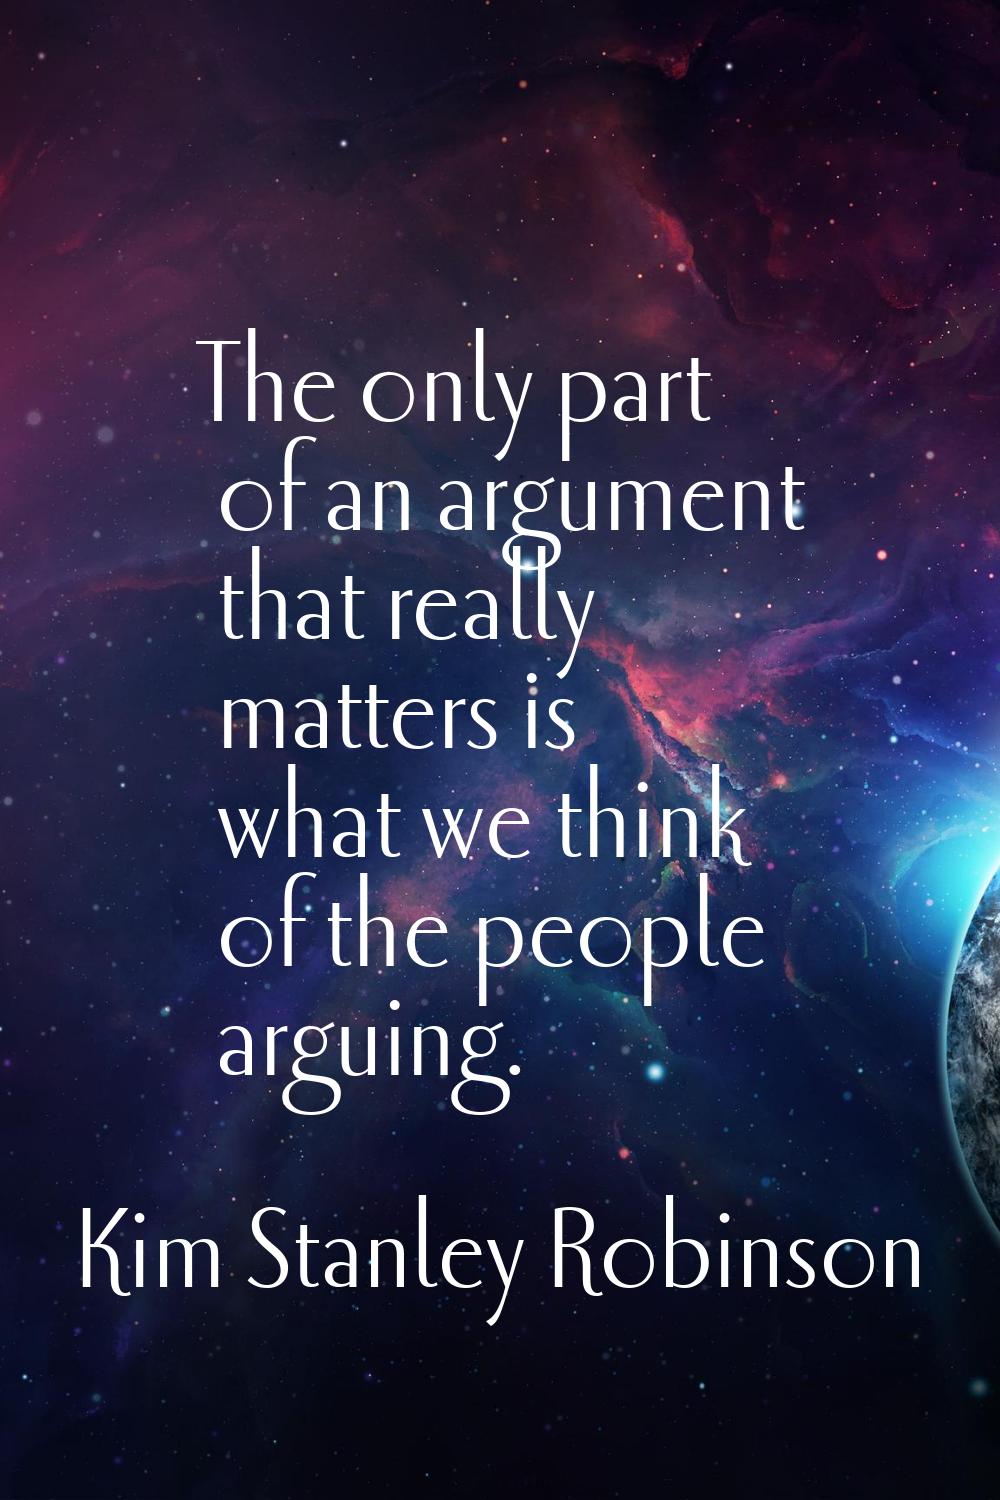 The only part of an argument that really matters is what we think of the people arguing.